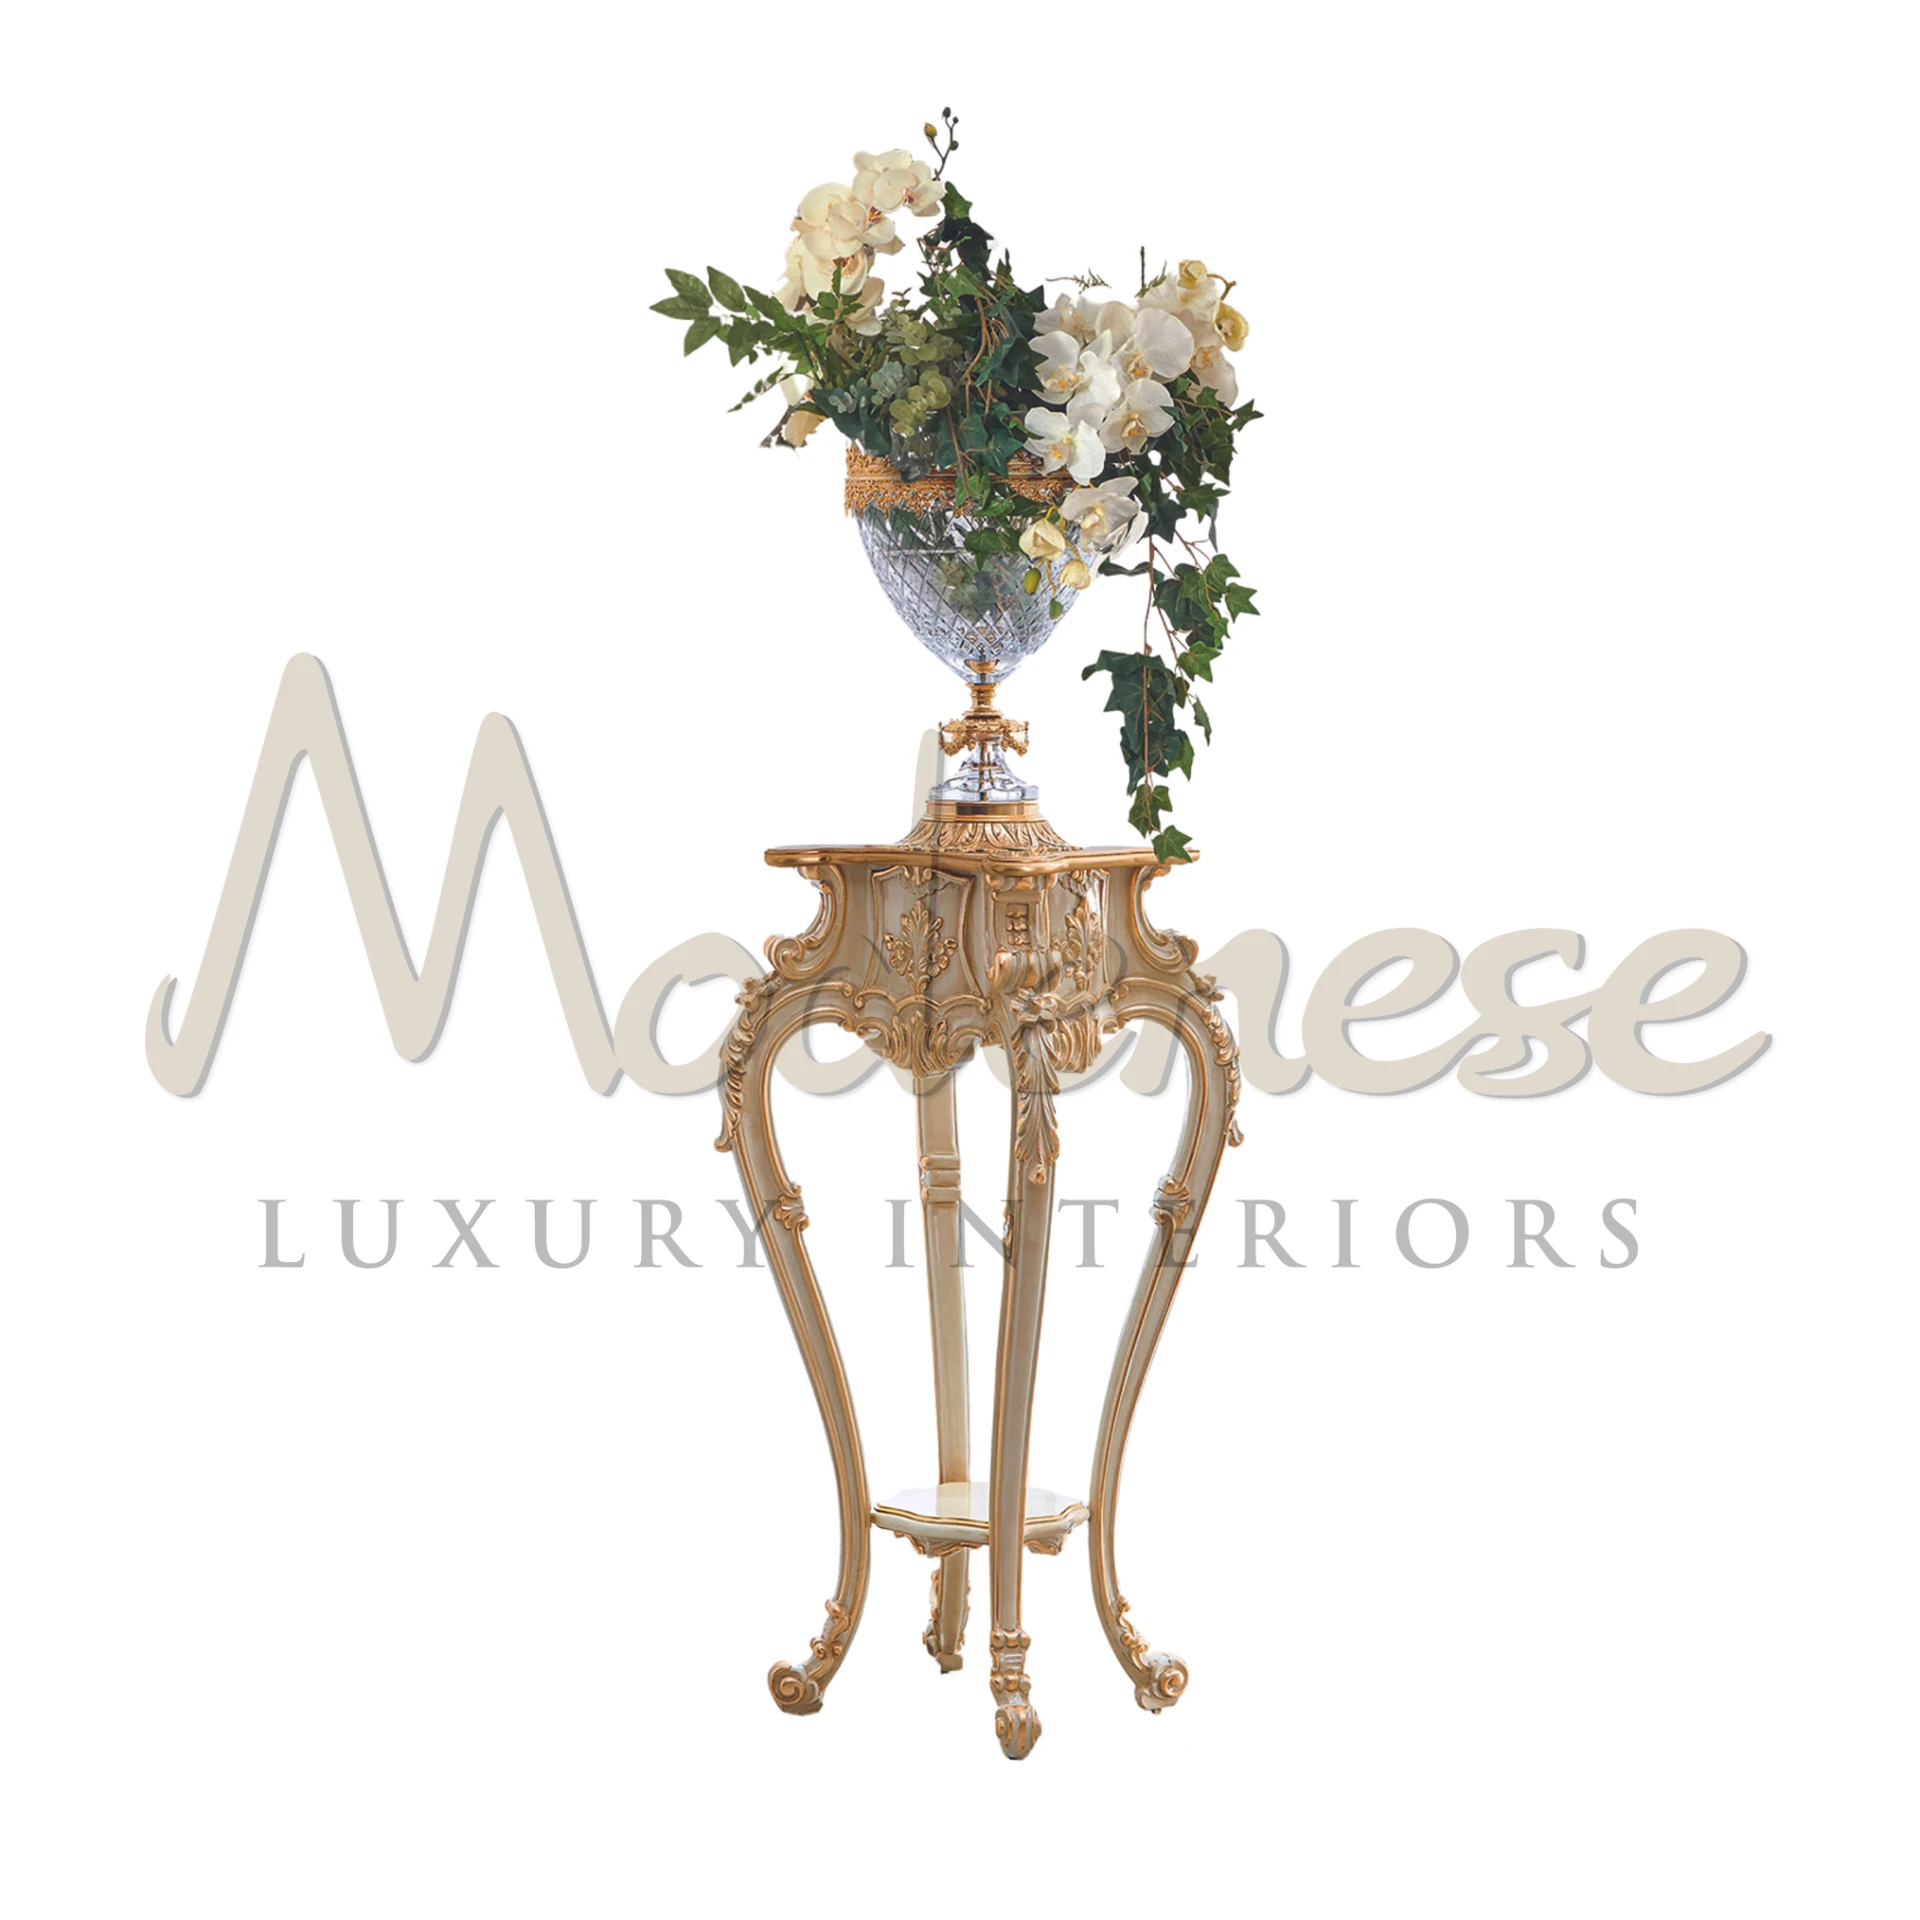 Baroque Classic Vase Stand, embodying 17th-century luxury with intricate carvings and ornamental motifs.